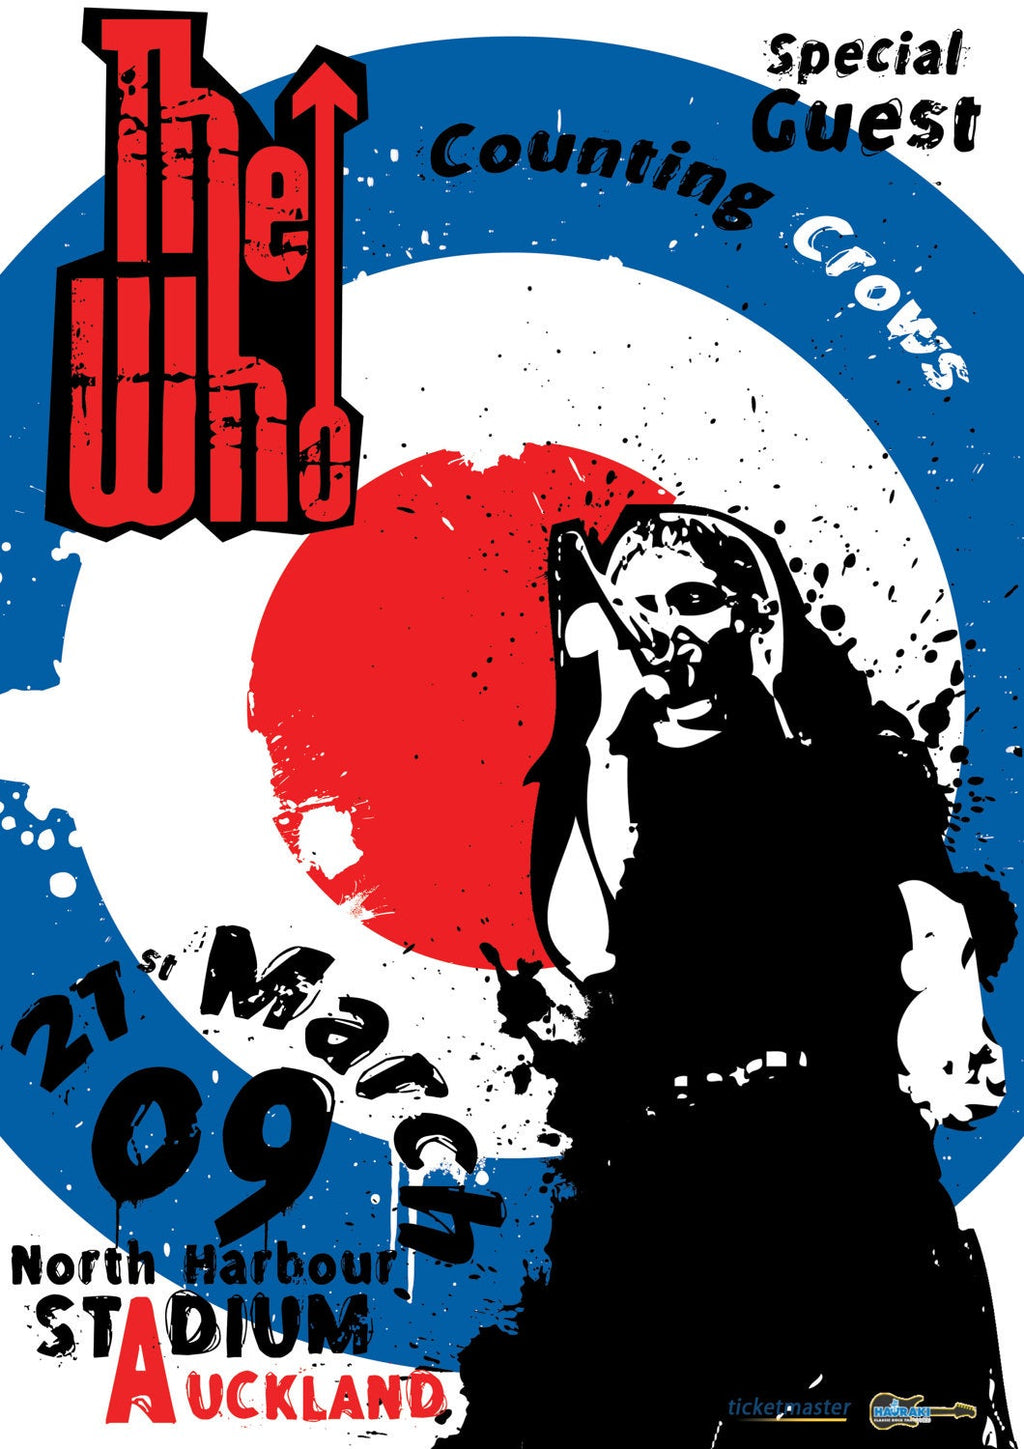 Vintage Music Art Poster - The Who 09 North Harbour Stadium Auckland - 0276